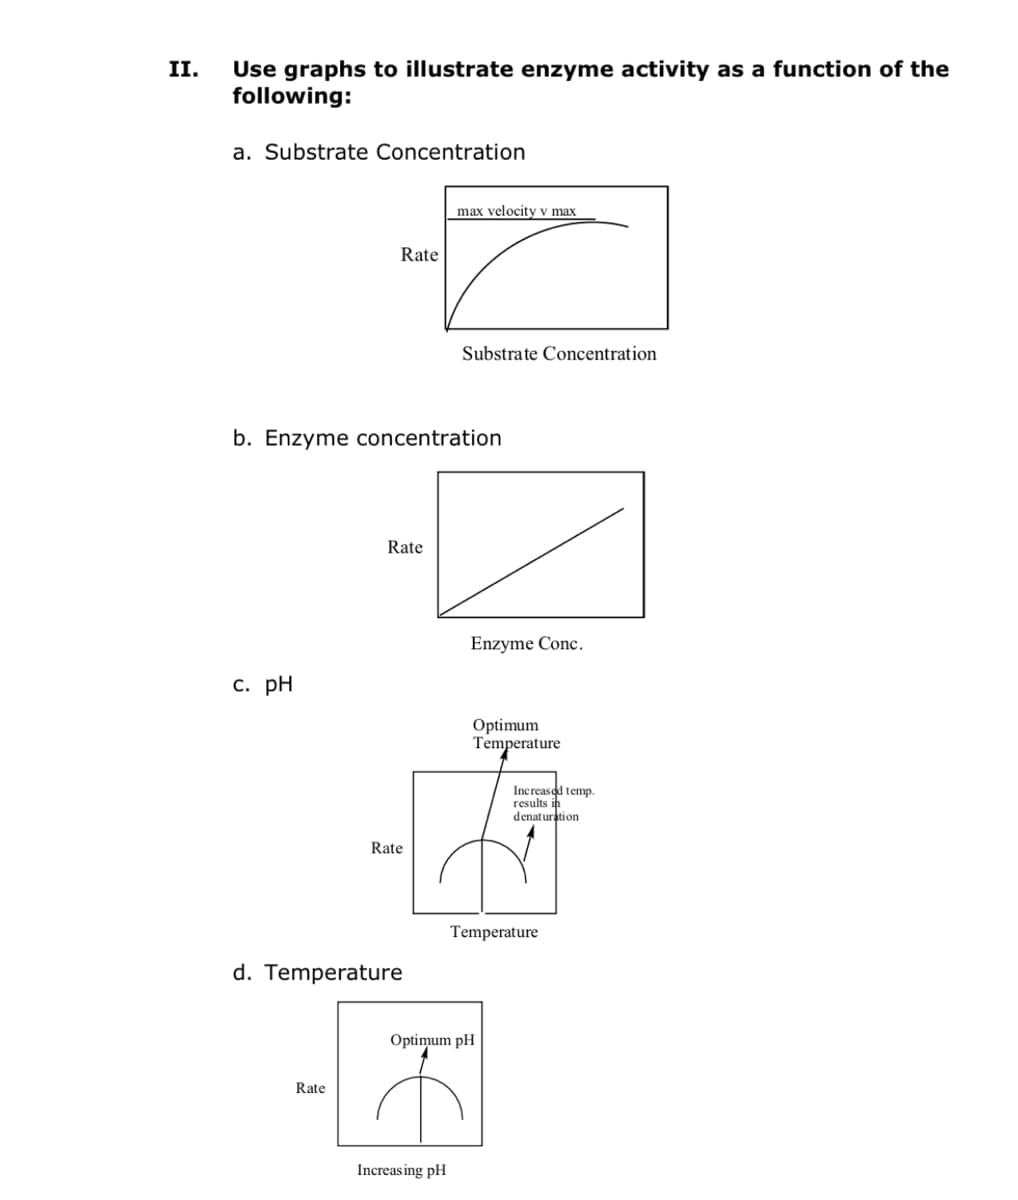 Use graphs to illustrate enzyme activity as a function of the
following:
II.
a. Substrate Concentration
max velocity v max
Rate
Substrate Concentration
b. Enzyme concentration
Rate
Enzyme Conc.
с. рH
Optimum
Temperature
Increasod temp.
results in
denaturation
Rate
Temperature
d. Temperature
Optimum pH
Rate
Increas ing pH
